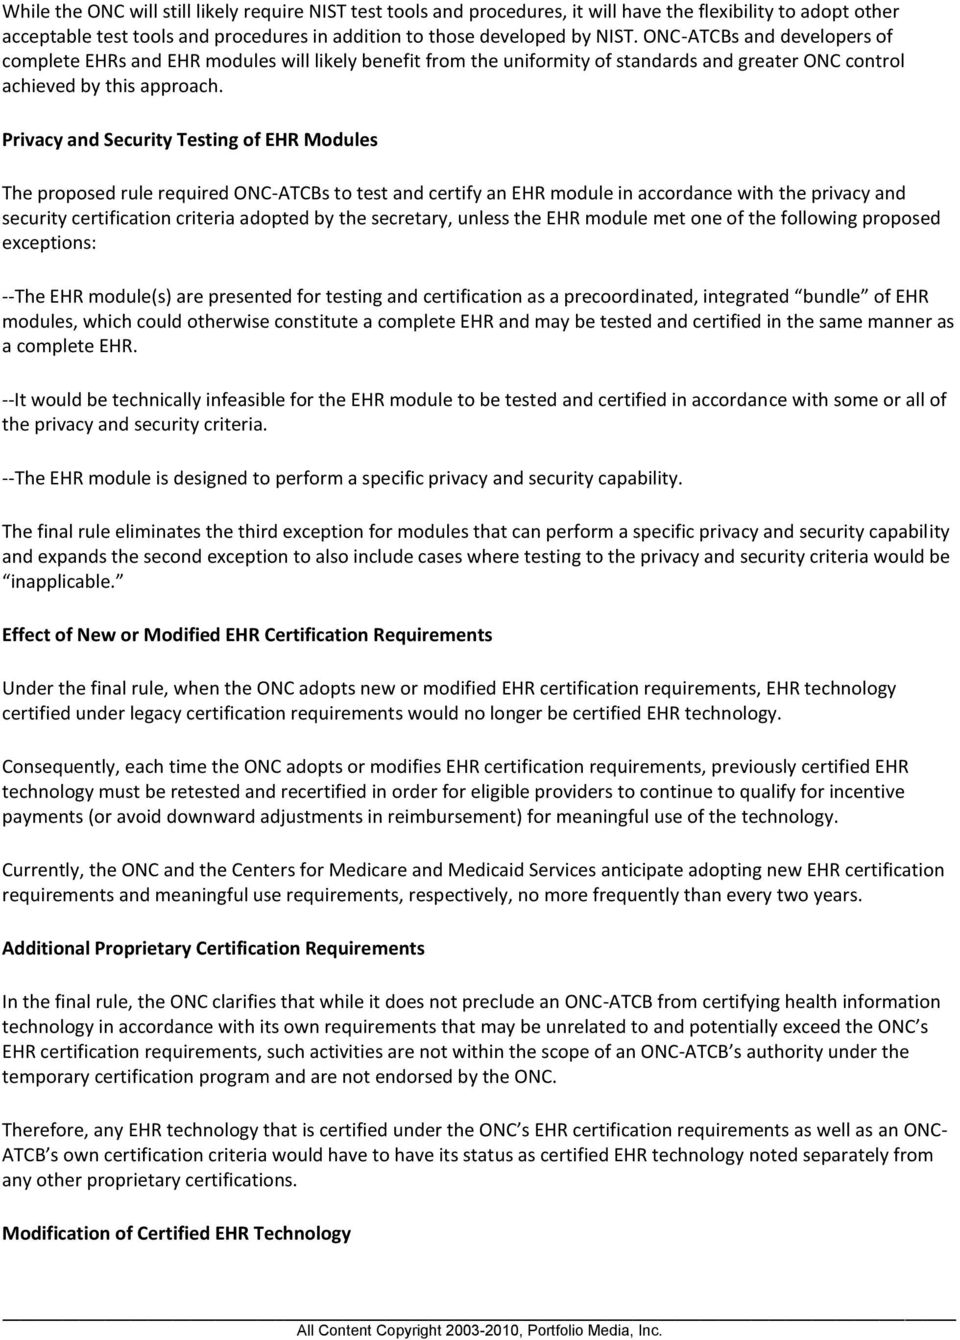 Privacy and Security Testing of EHR Modules The proposed rule required ONC-ATCBs to test and certify an EHR module in accordance with the privacy and security certification criteria adopted by the